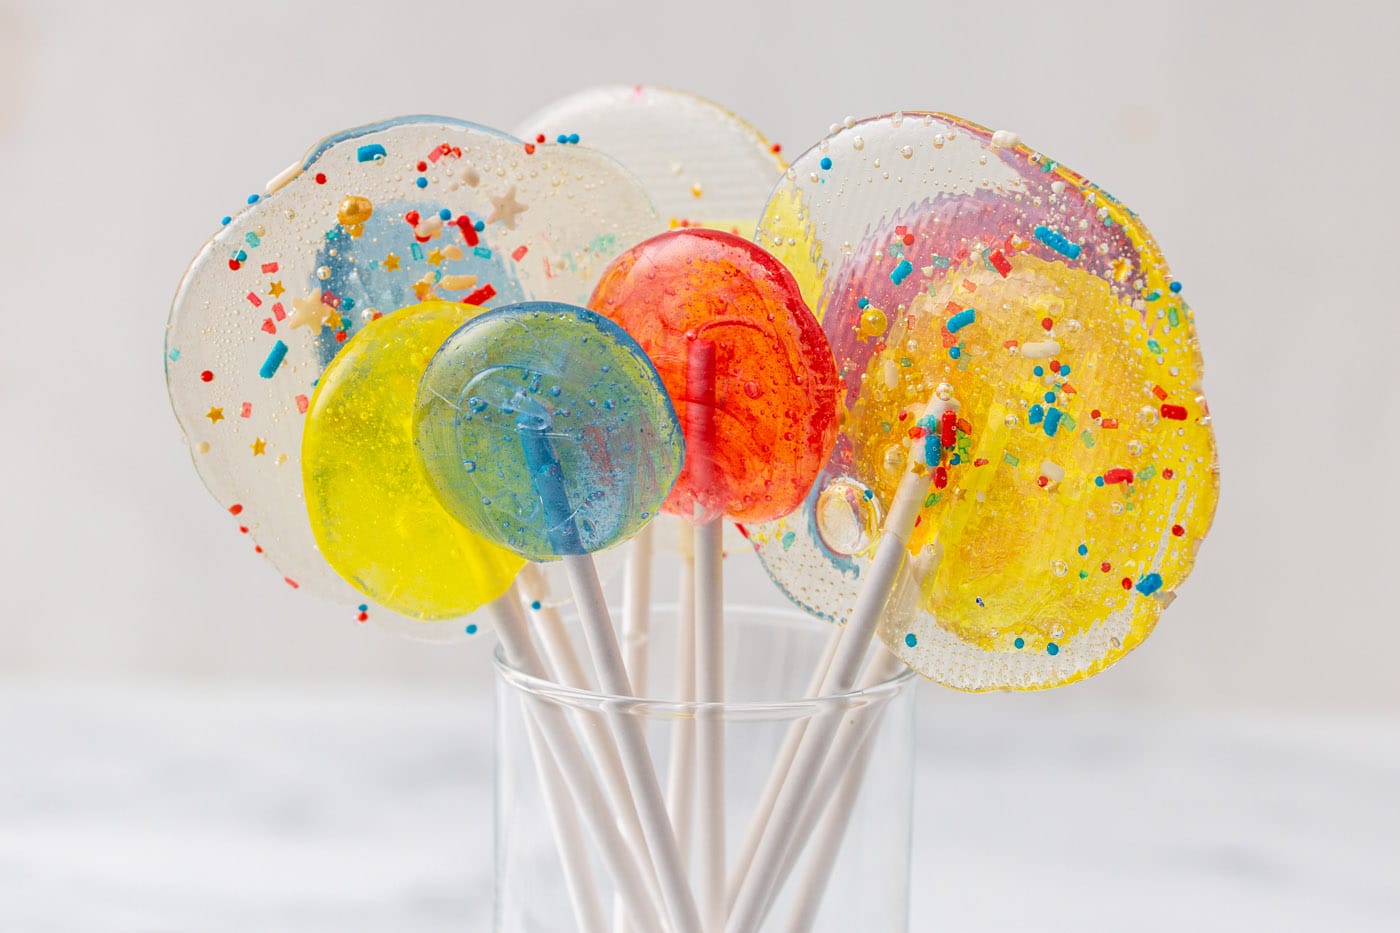 All you need to make homemade lollipops is light corn syrup, sugar, flavored extracts, optional food